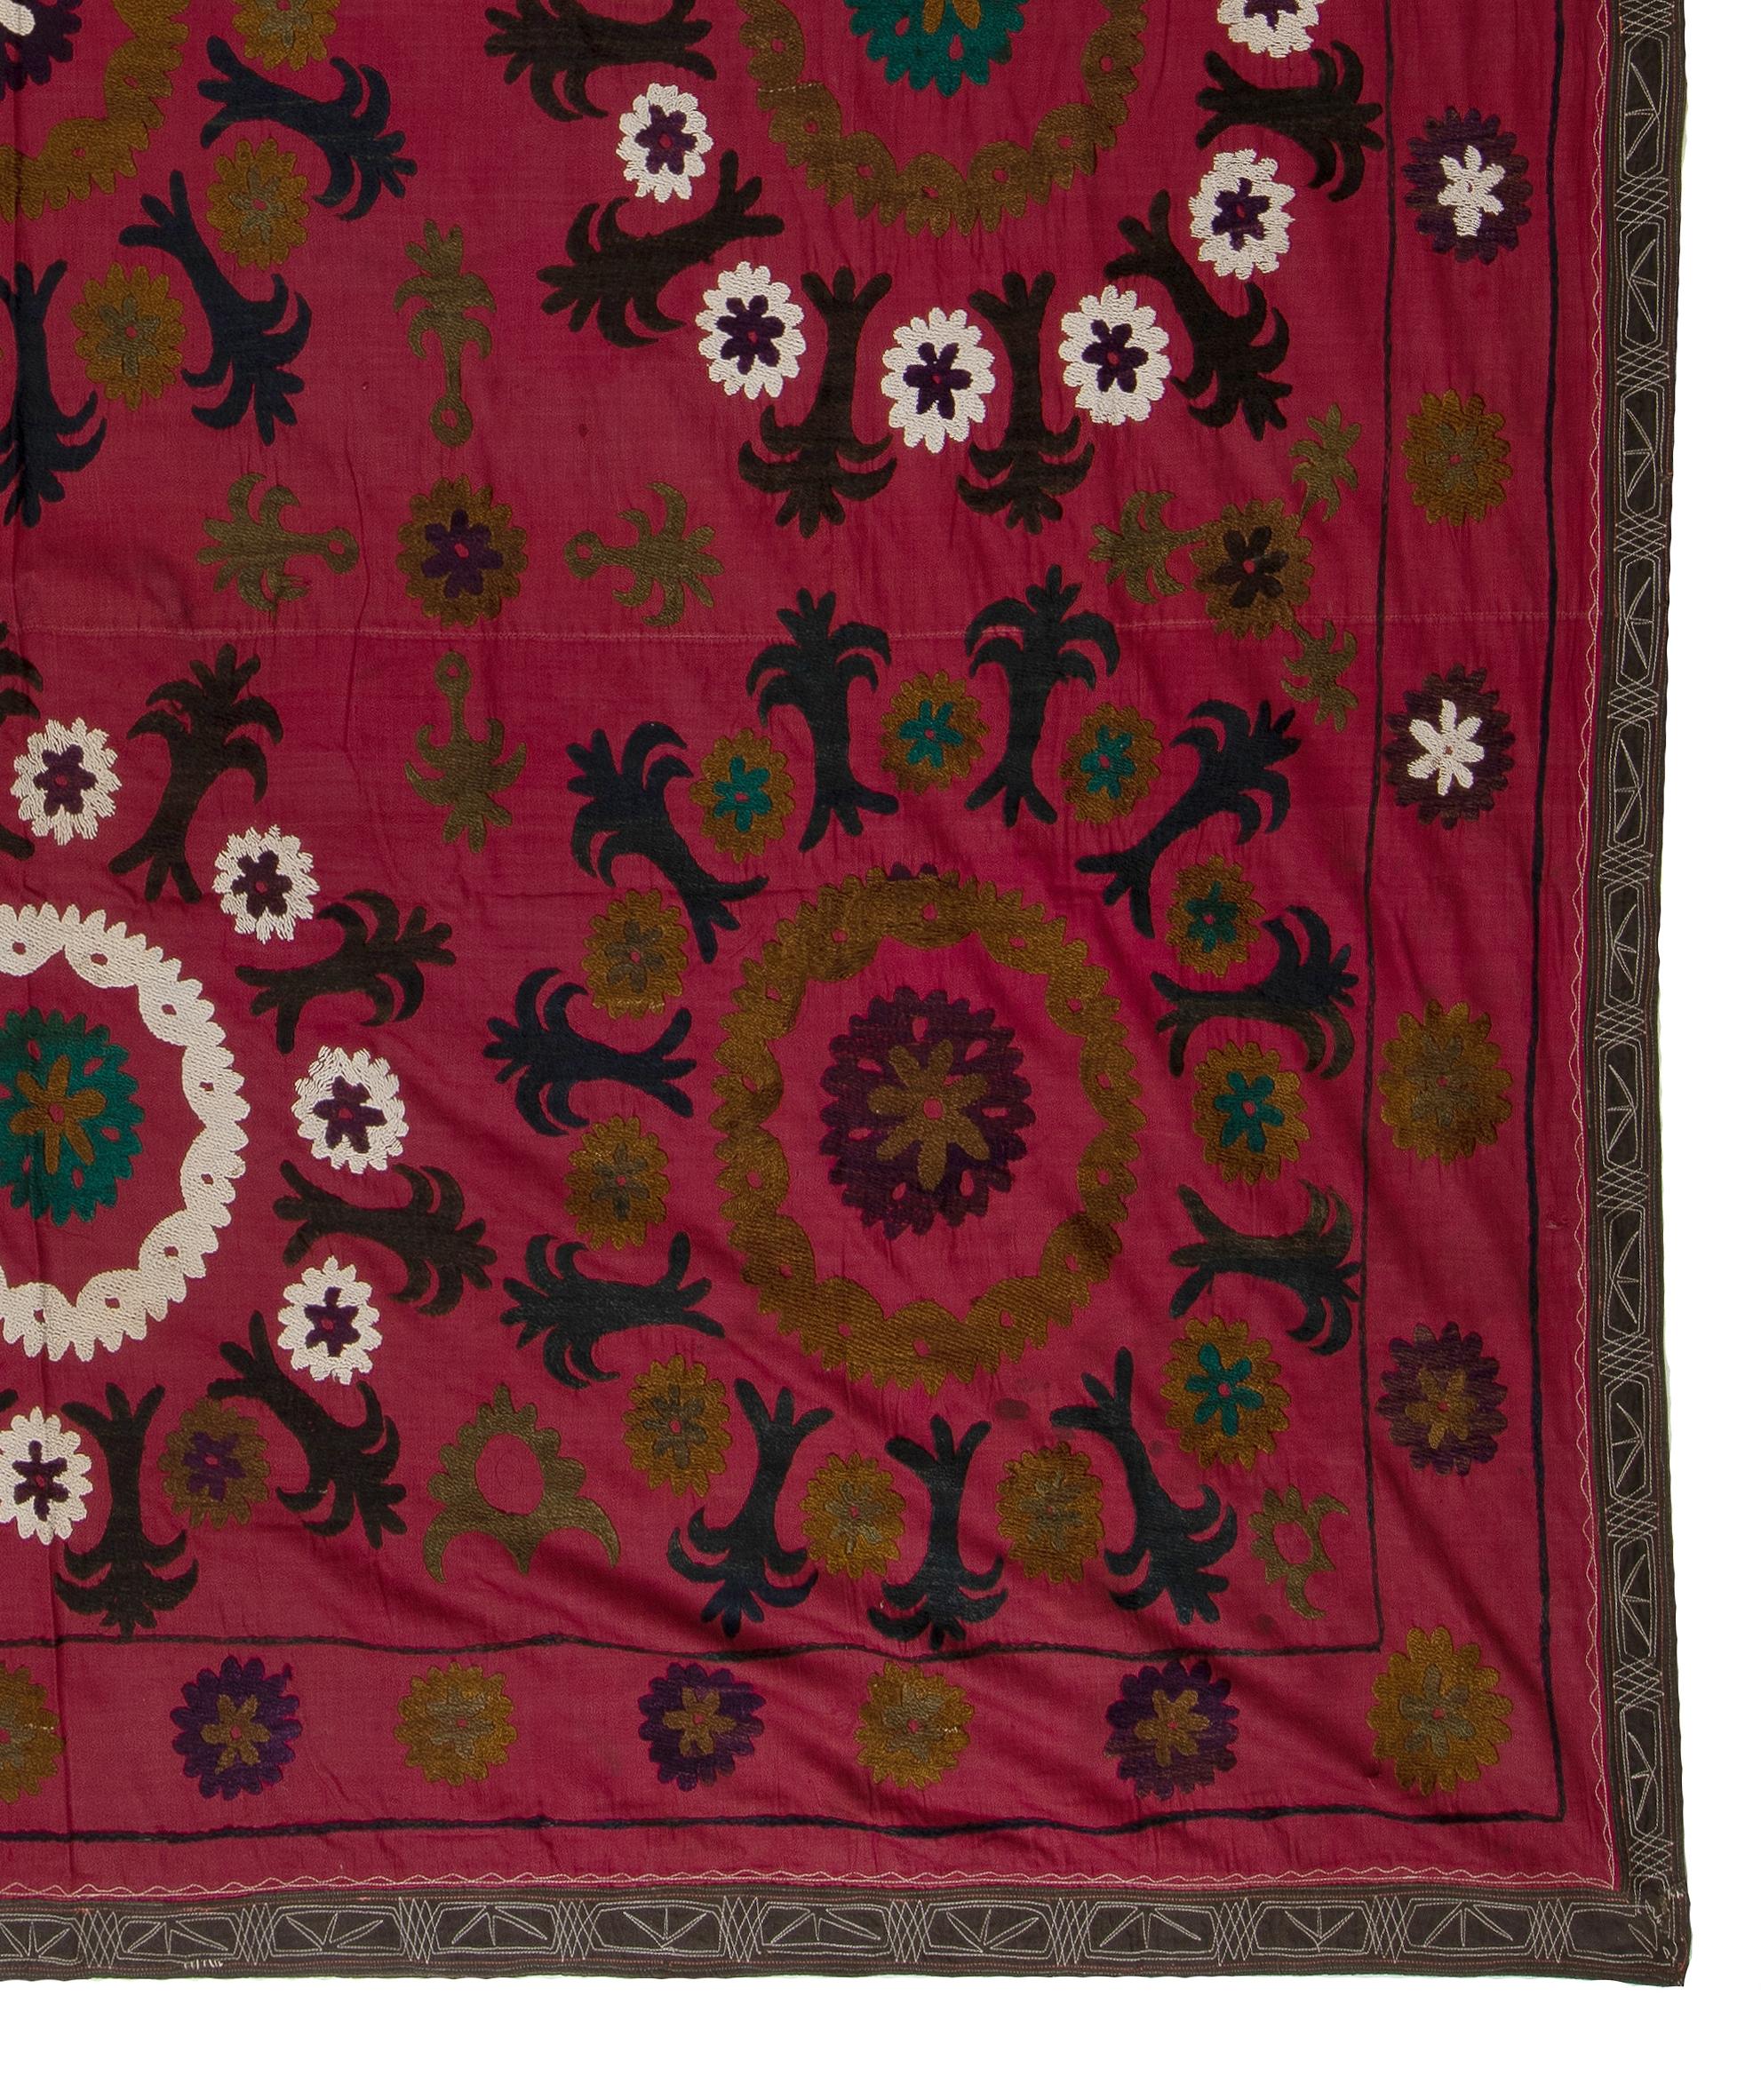 20th Century 7x7.4 Ft Central Asian Suzani Textile, Embroidered Cotton & Silk Wall Hanging For Sale